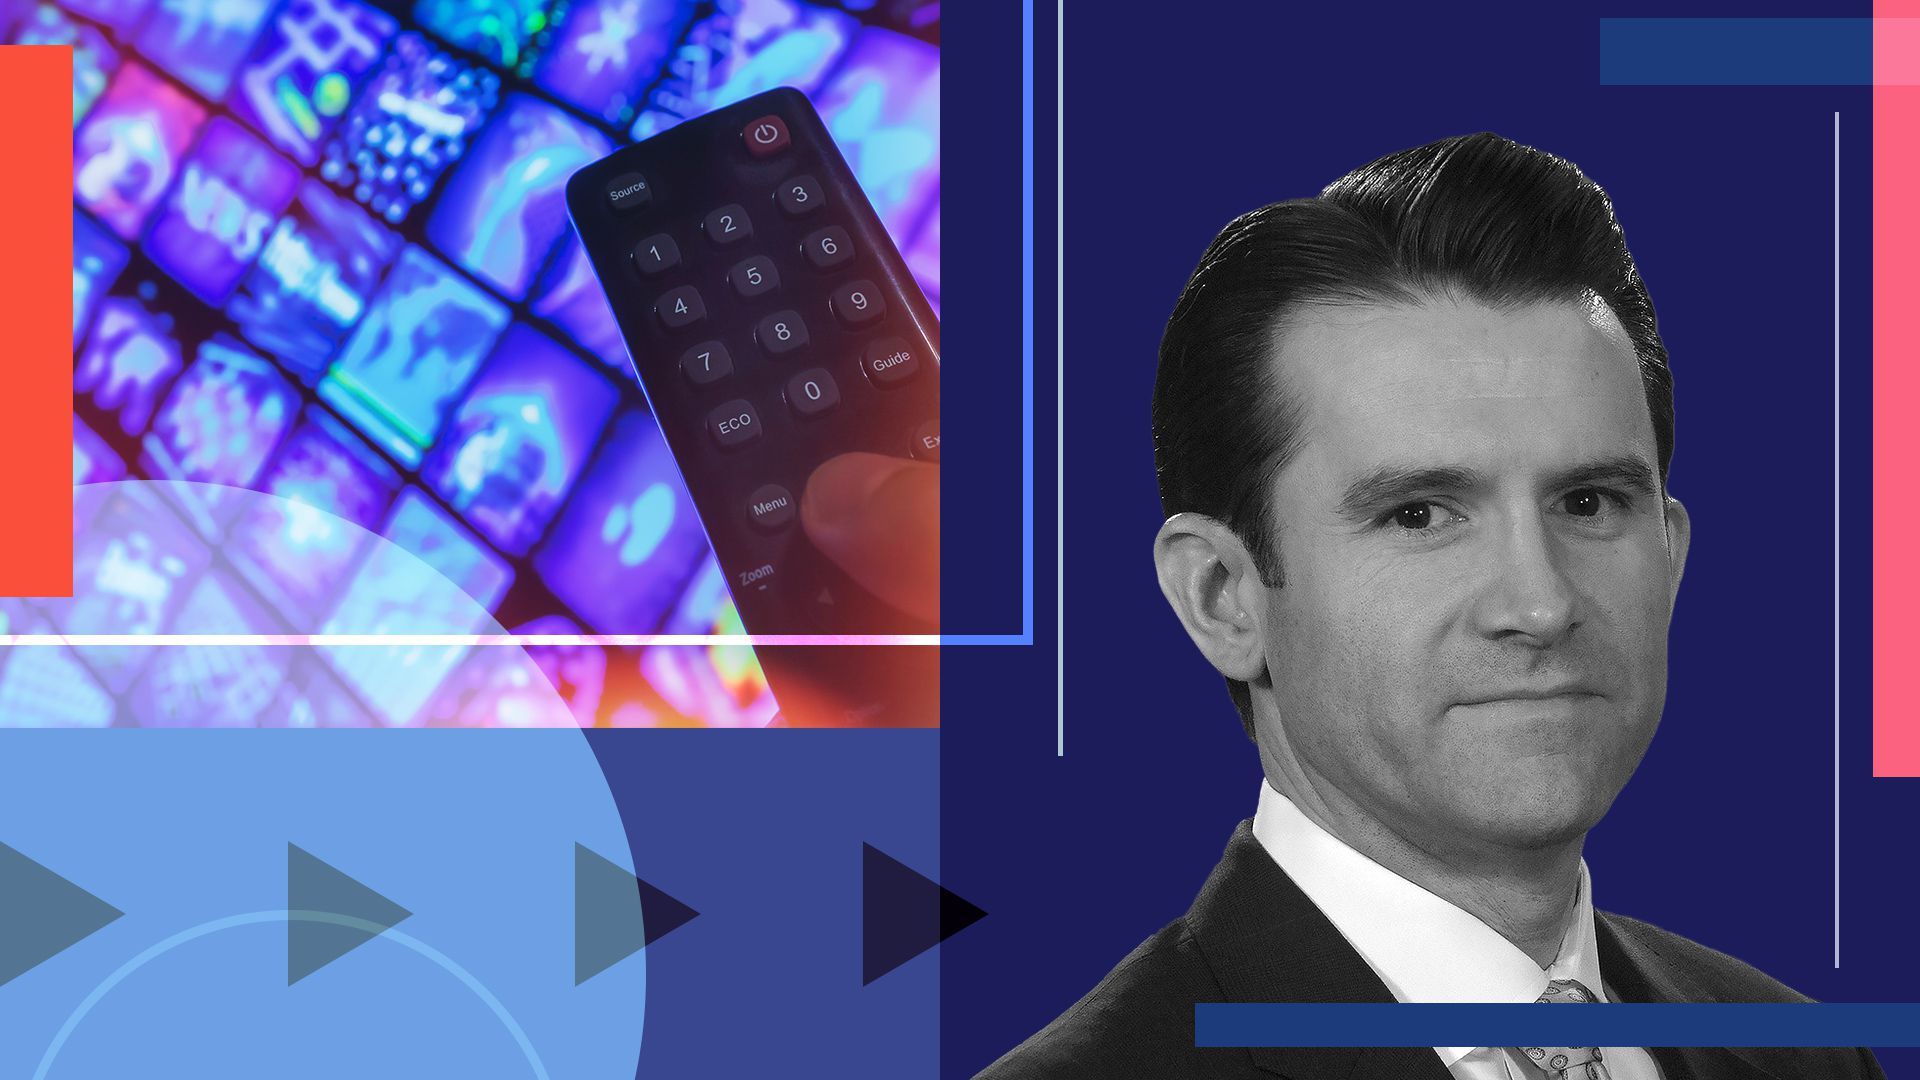 Photo illustration of Chris Ripley, CEO of Sinclair Broadcast Group, with an image of a remote control choosing something to stream.